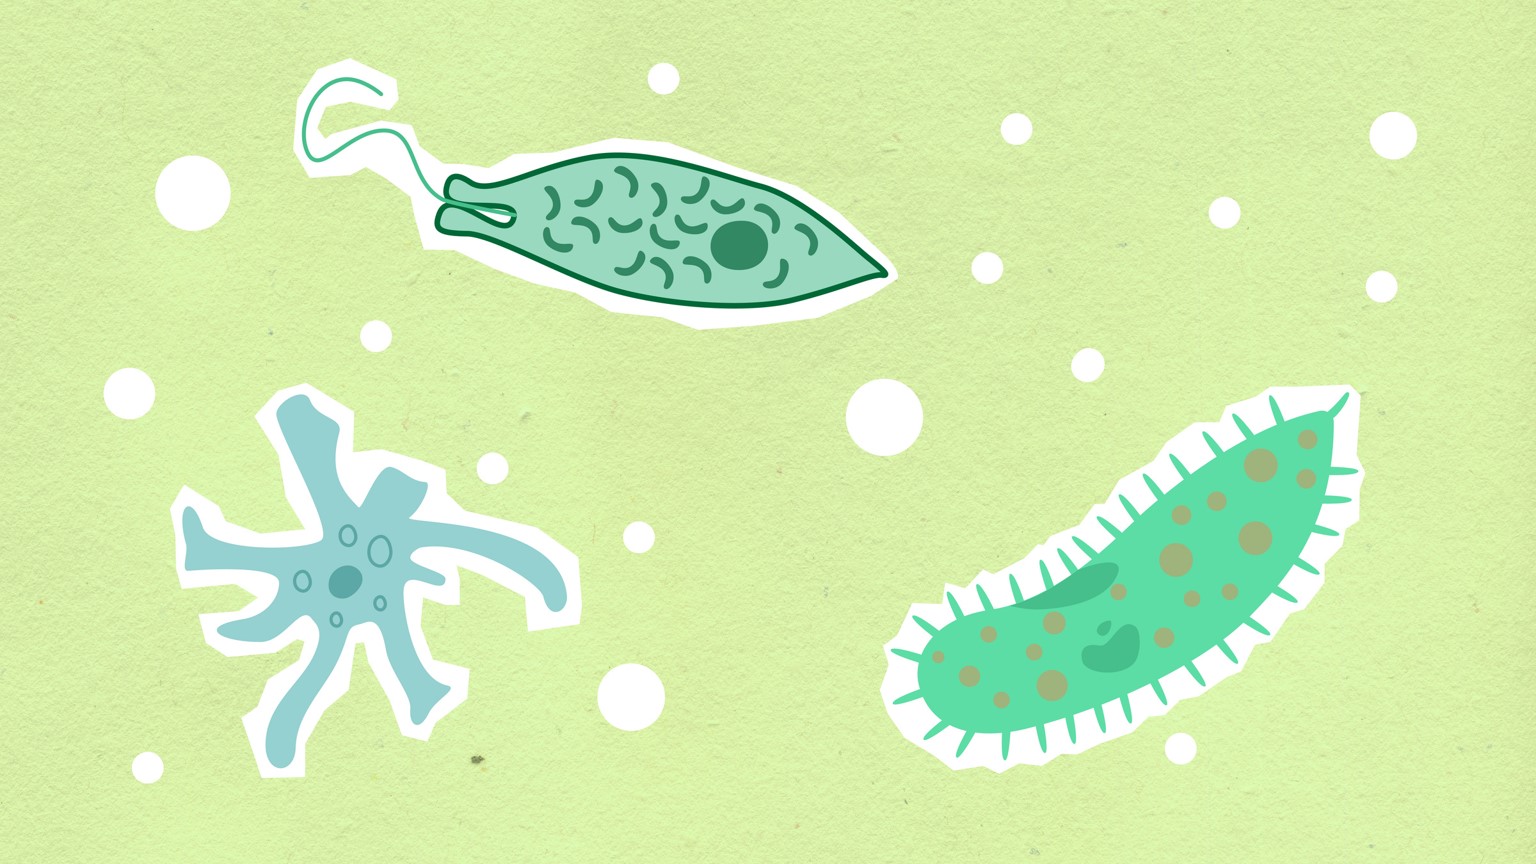 Illustration of 3 bacteria on a light green background with white dots